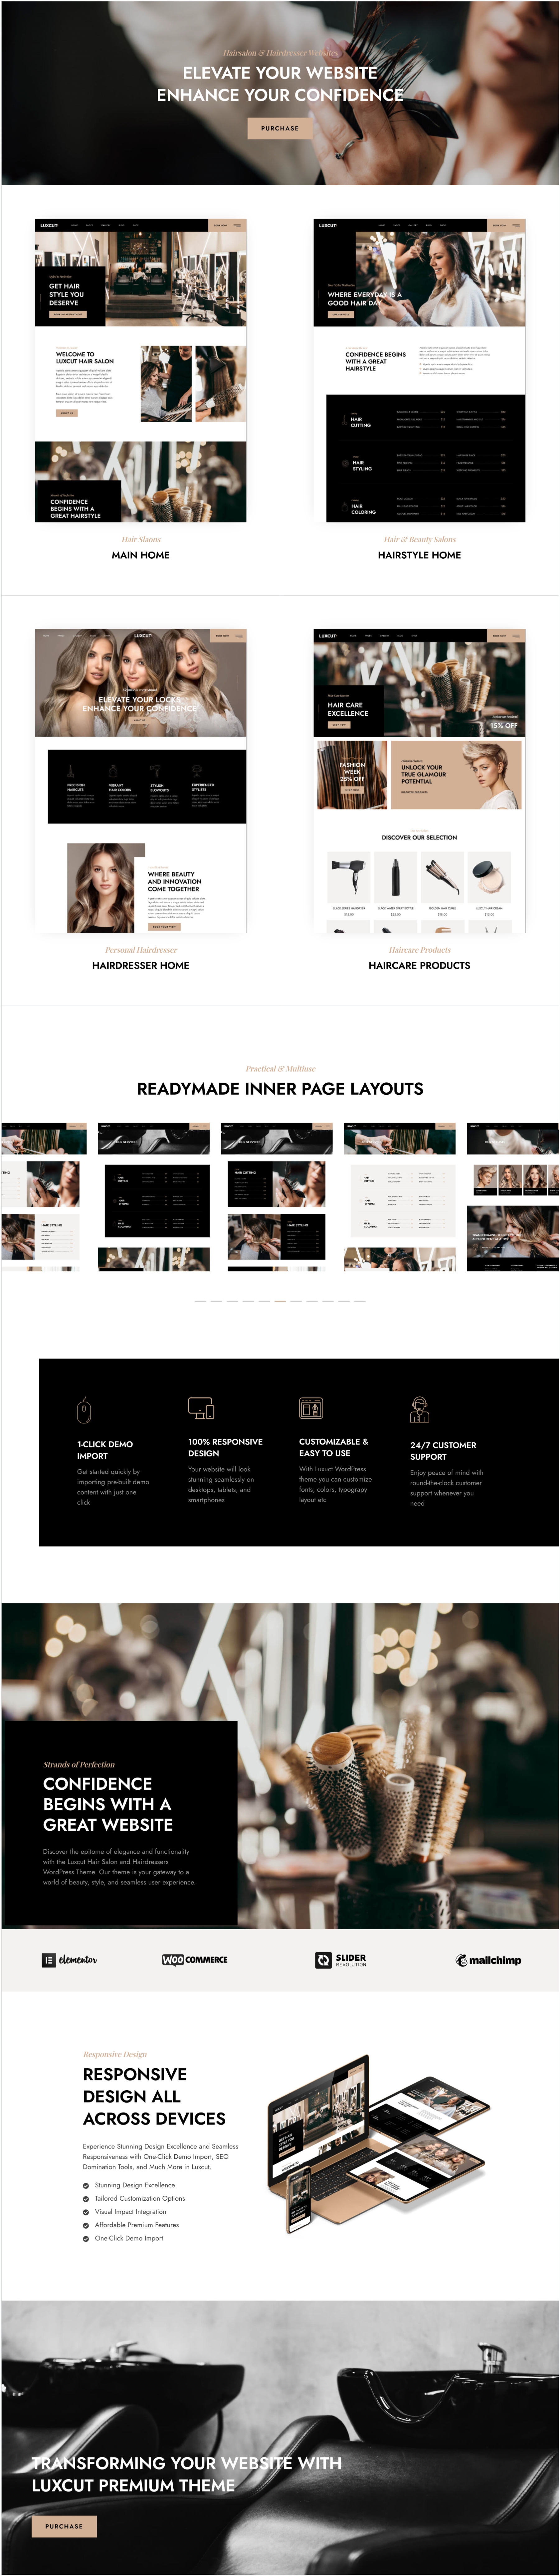 Luxcut - Hair Salons and Hairdressers WordPress Theme - 1